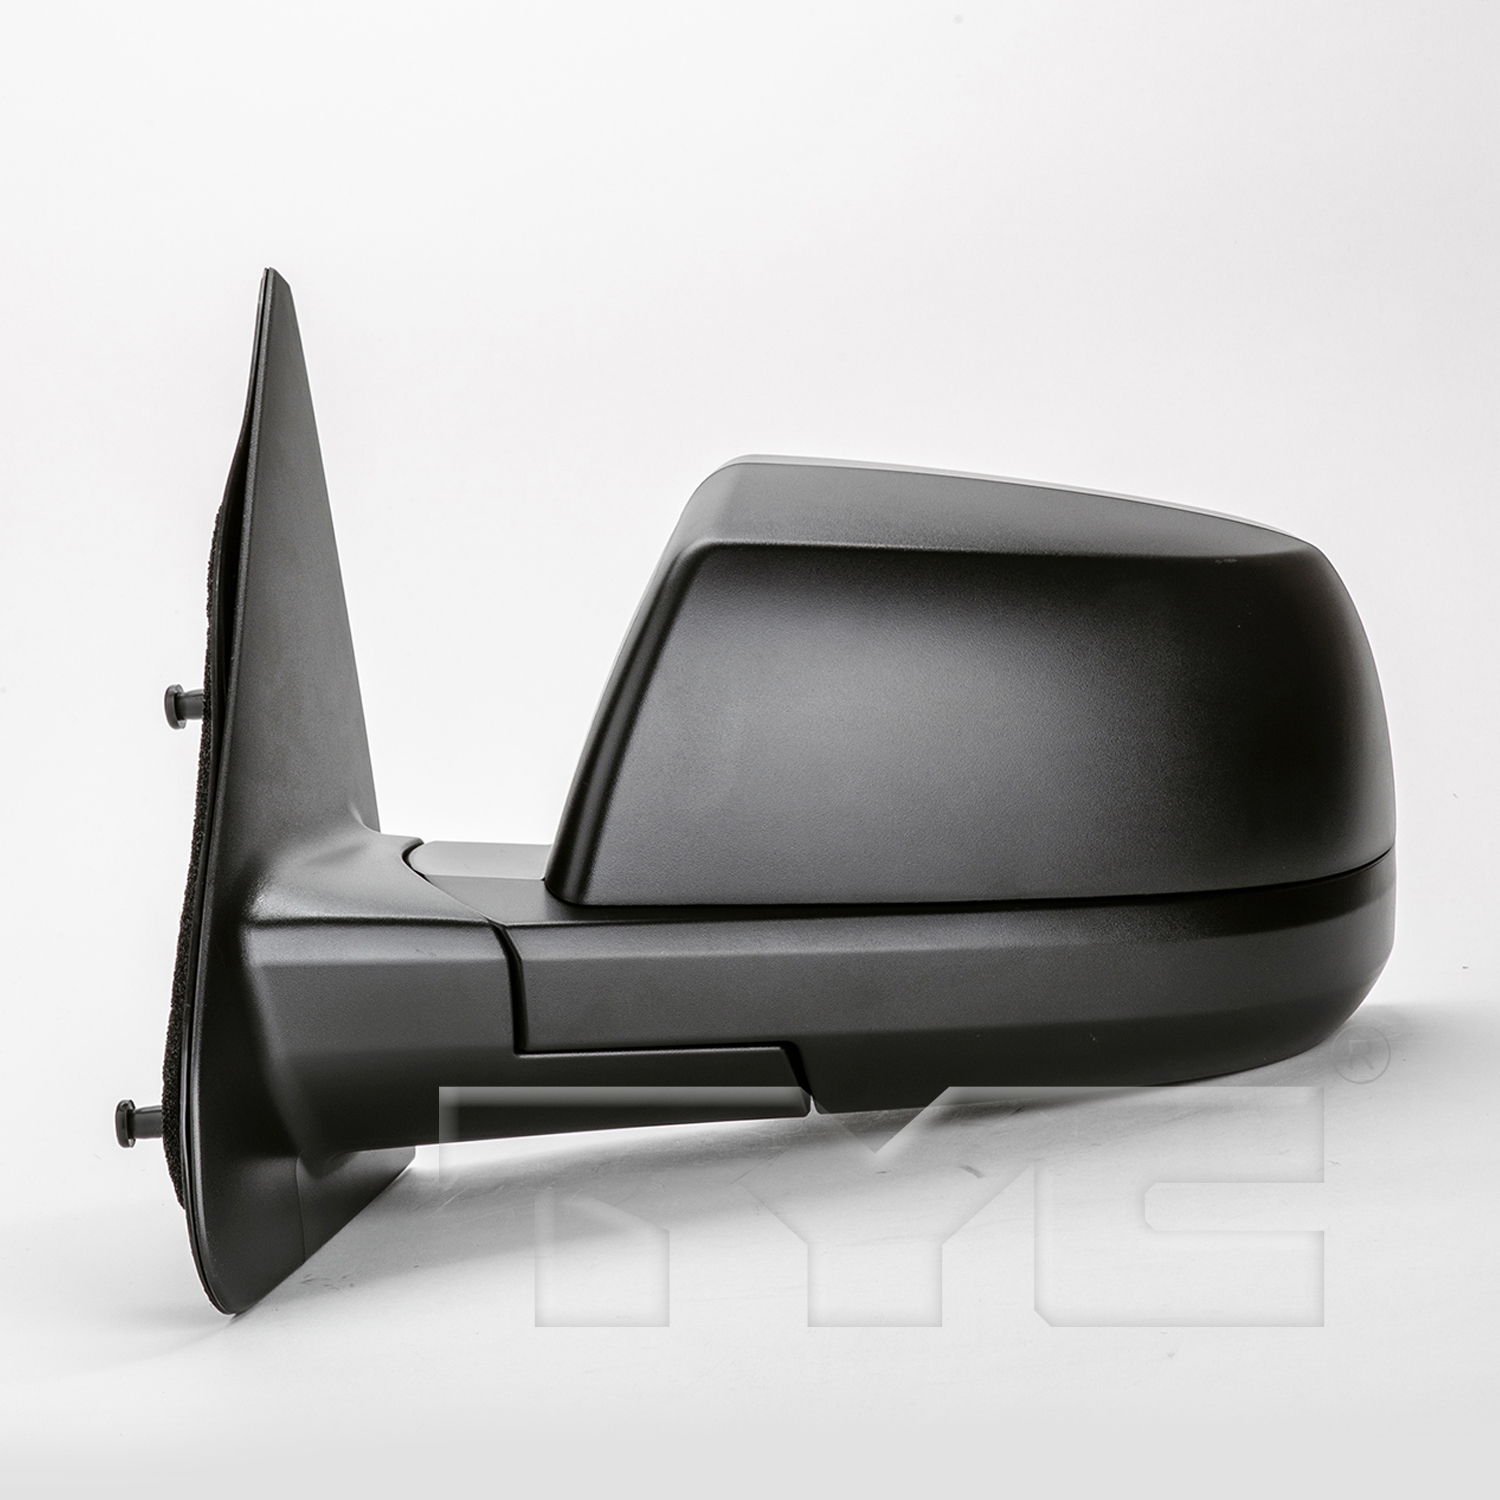 Aftermarket MIRRORS for TOYOTA - TUNDRA, TUNDRA,07-13,LT Mirror outside rear view